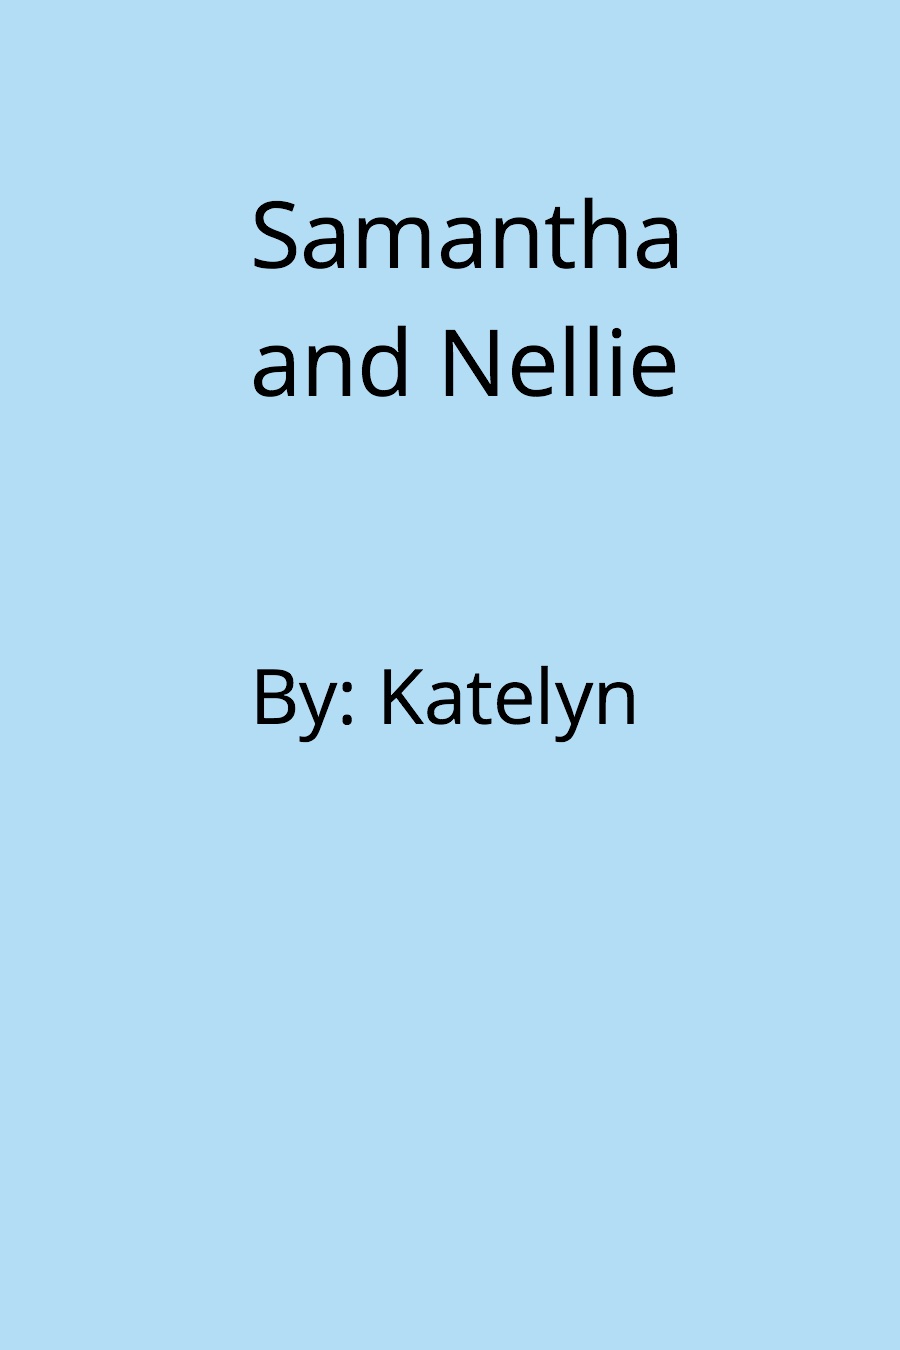 Smantha and Nellie